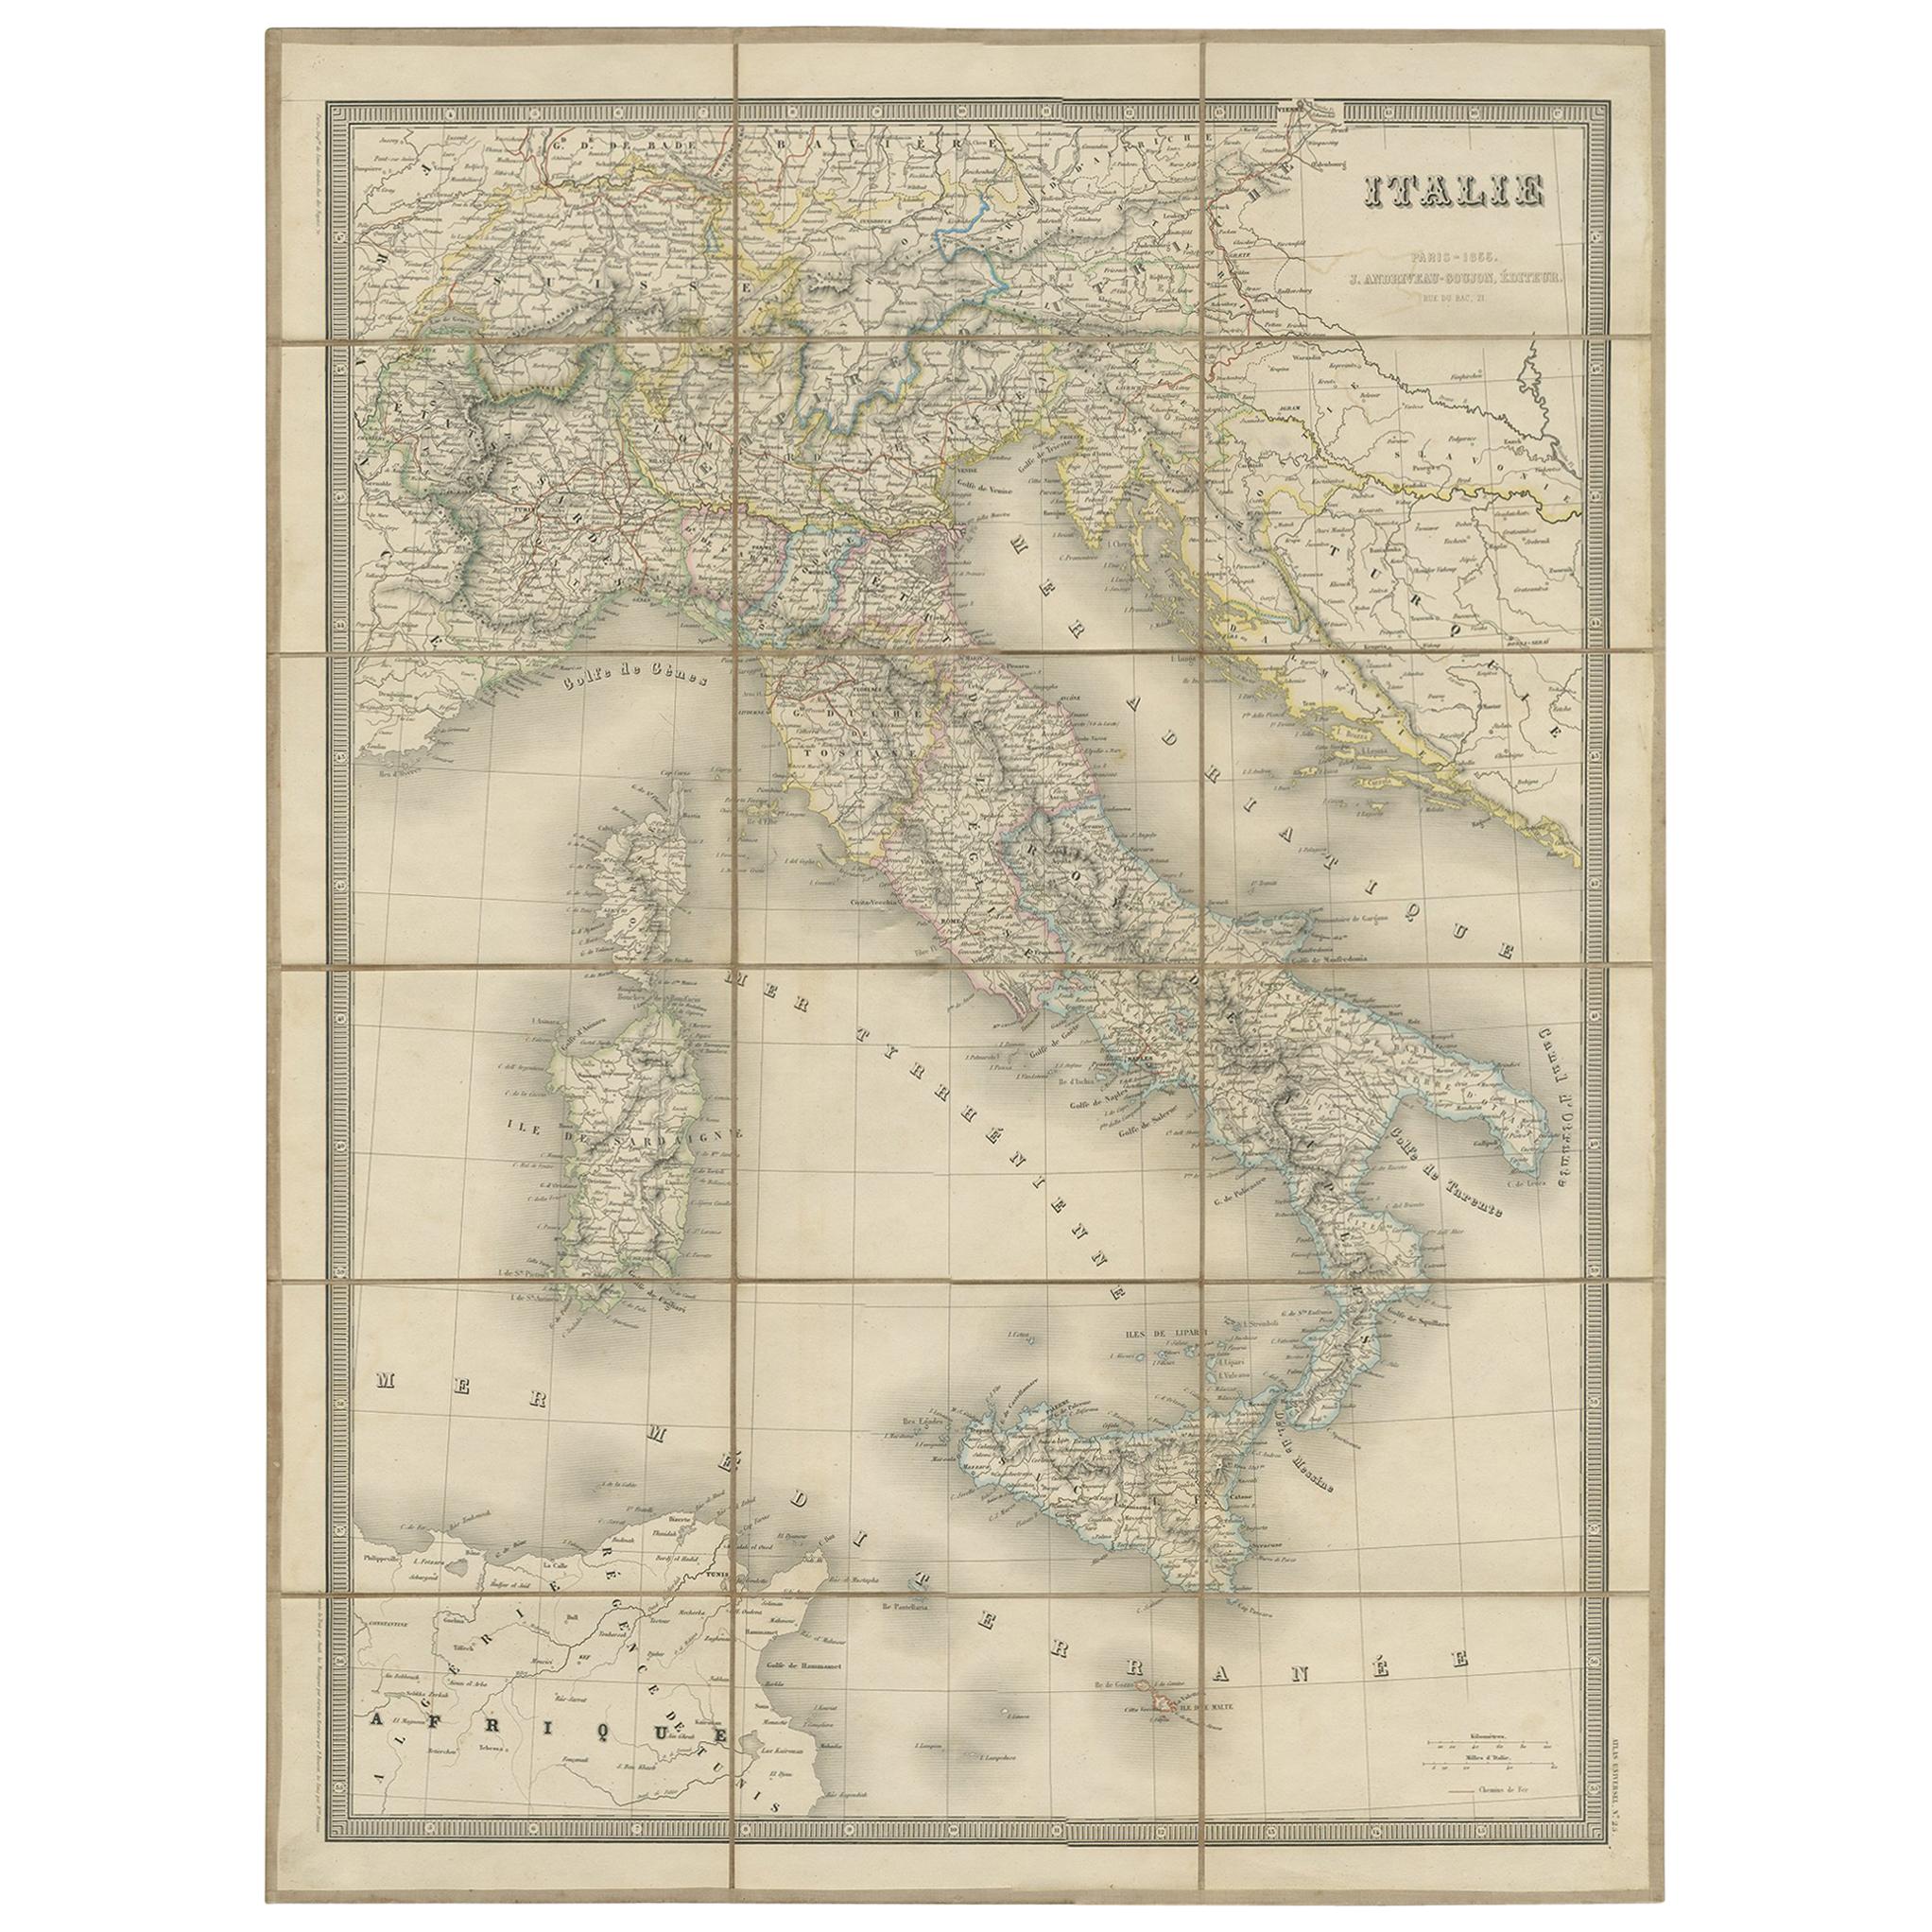 Antique Map of Italy by Andriveau-Goujon, 1855